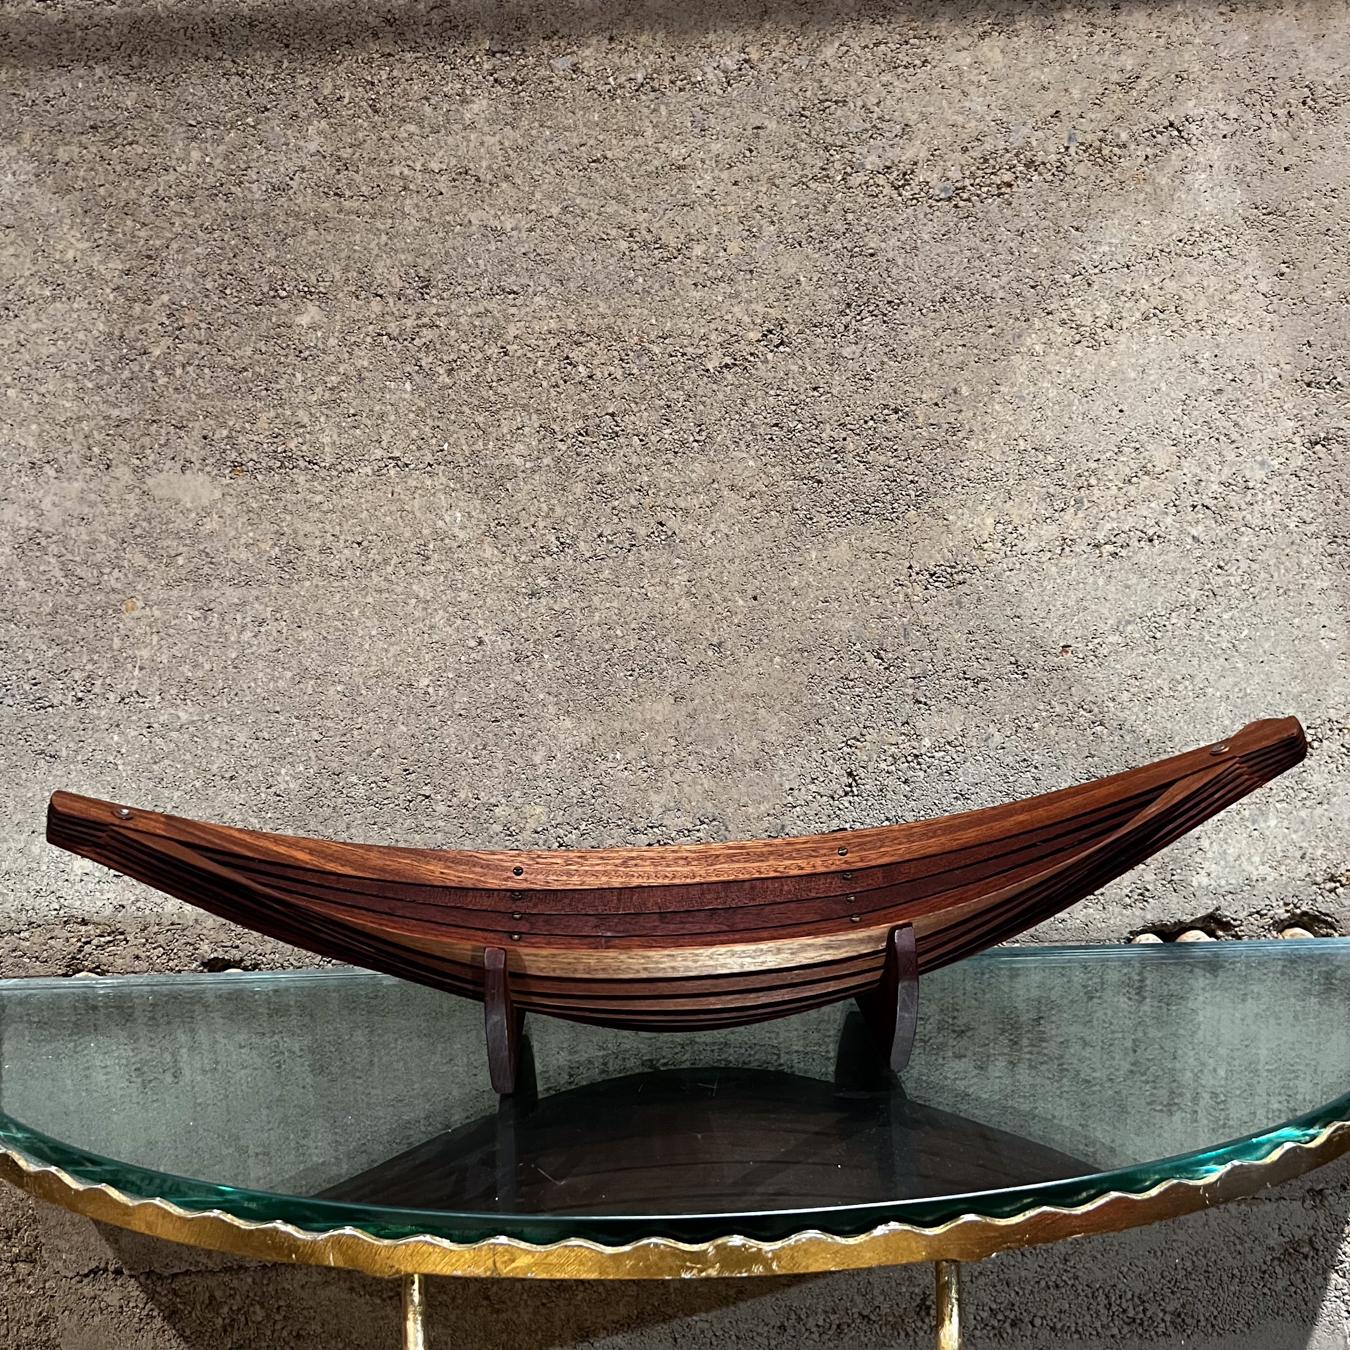 1970s Modern Sculptural Mahogany Brass Wood Canoe Bowl
5.25 h at tallest, 2.75 h at shortest x 21.5 wide x 6 depth
Preowned vintage condition
See images provided.